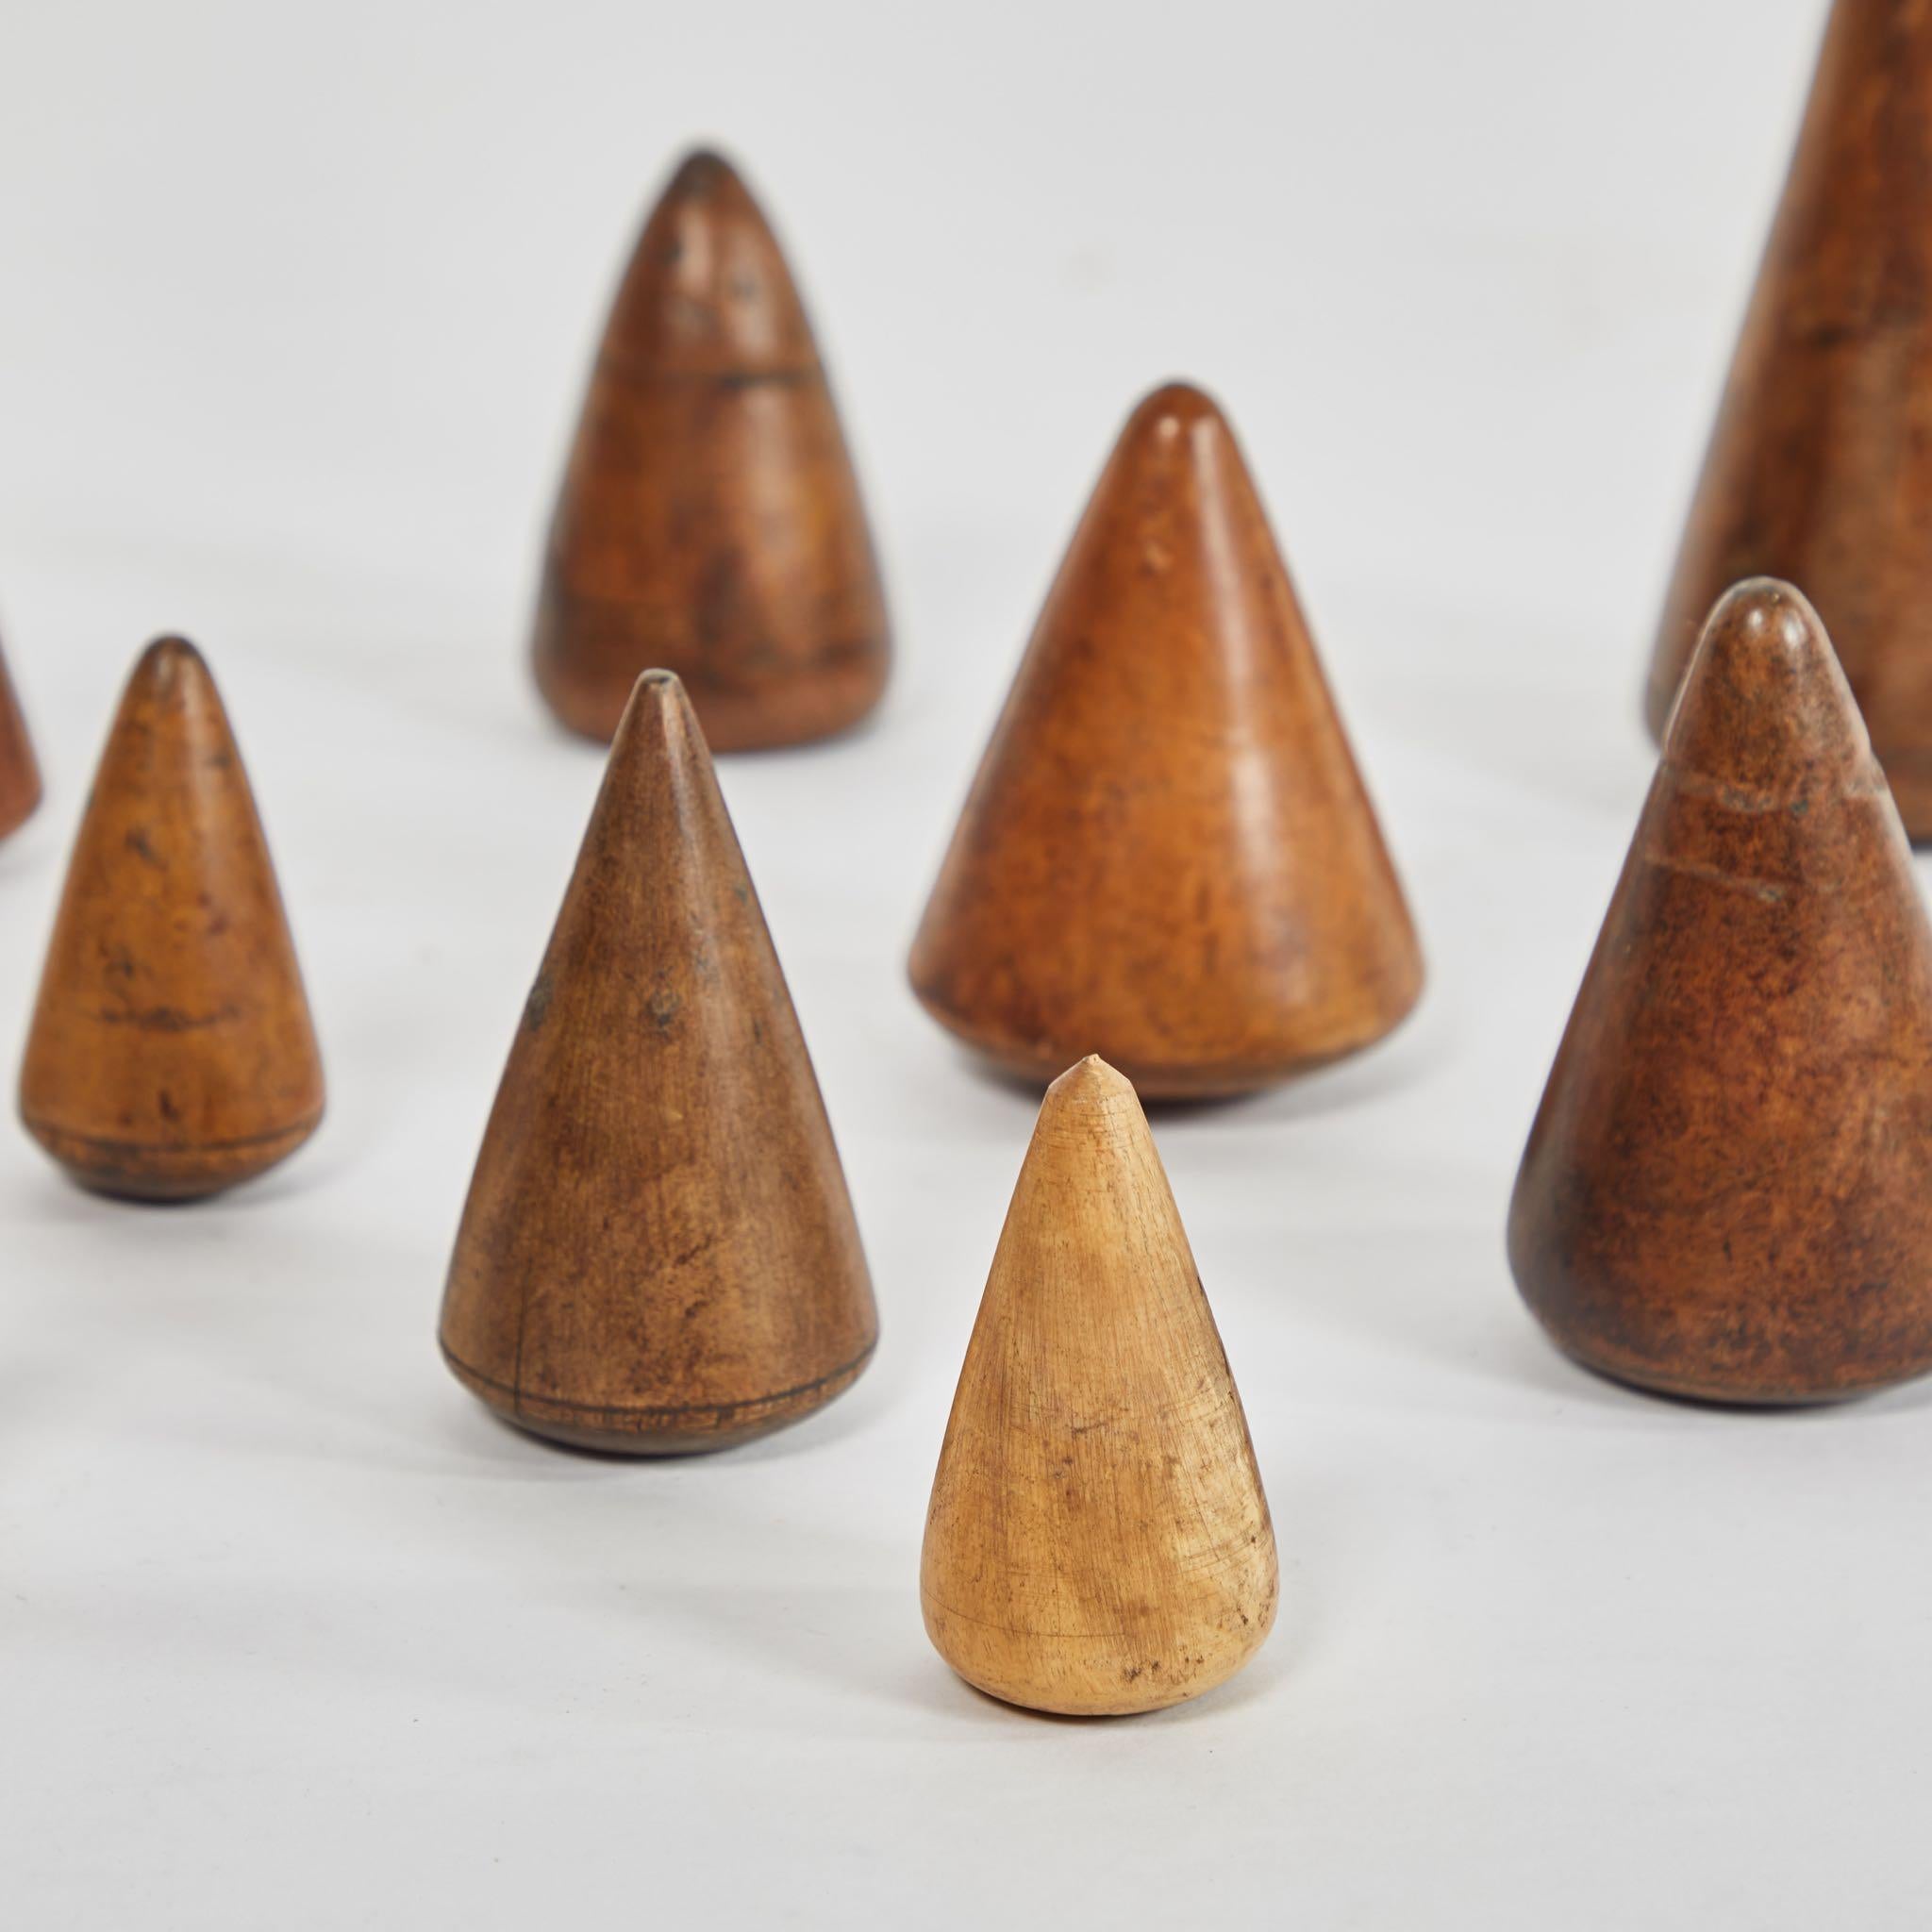 Late Victorian Wooden Turn-Pins